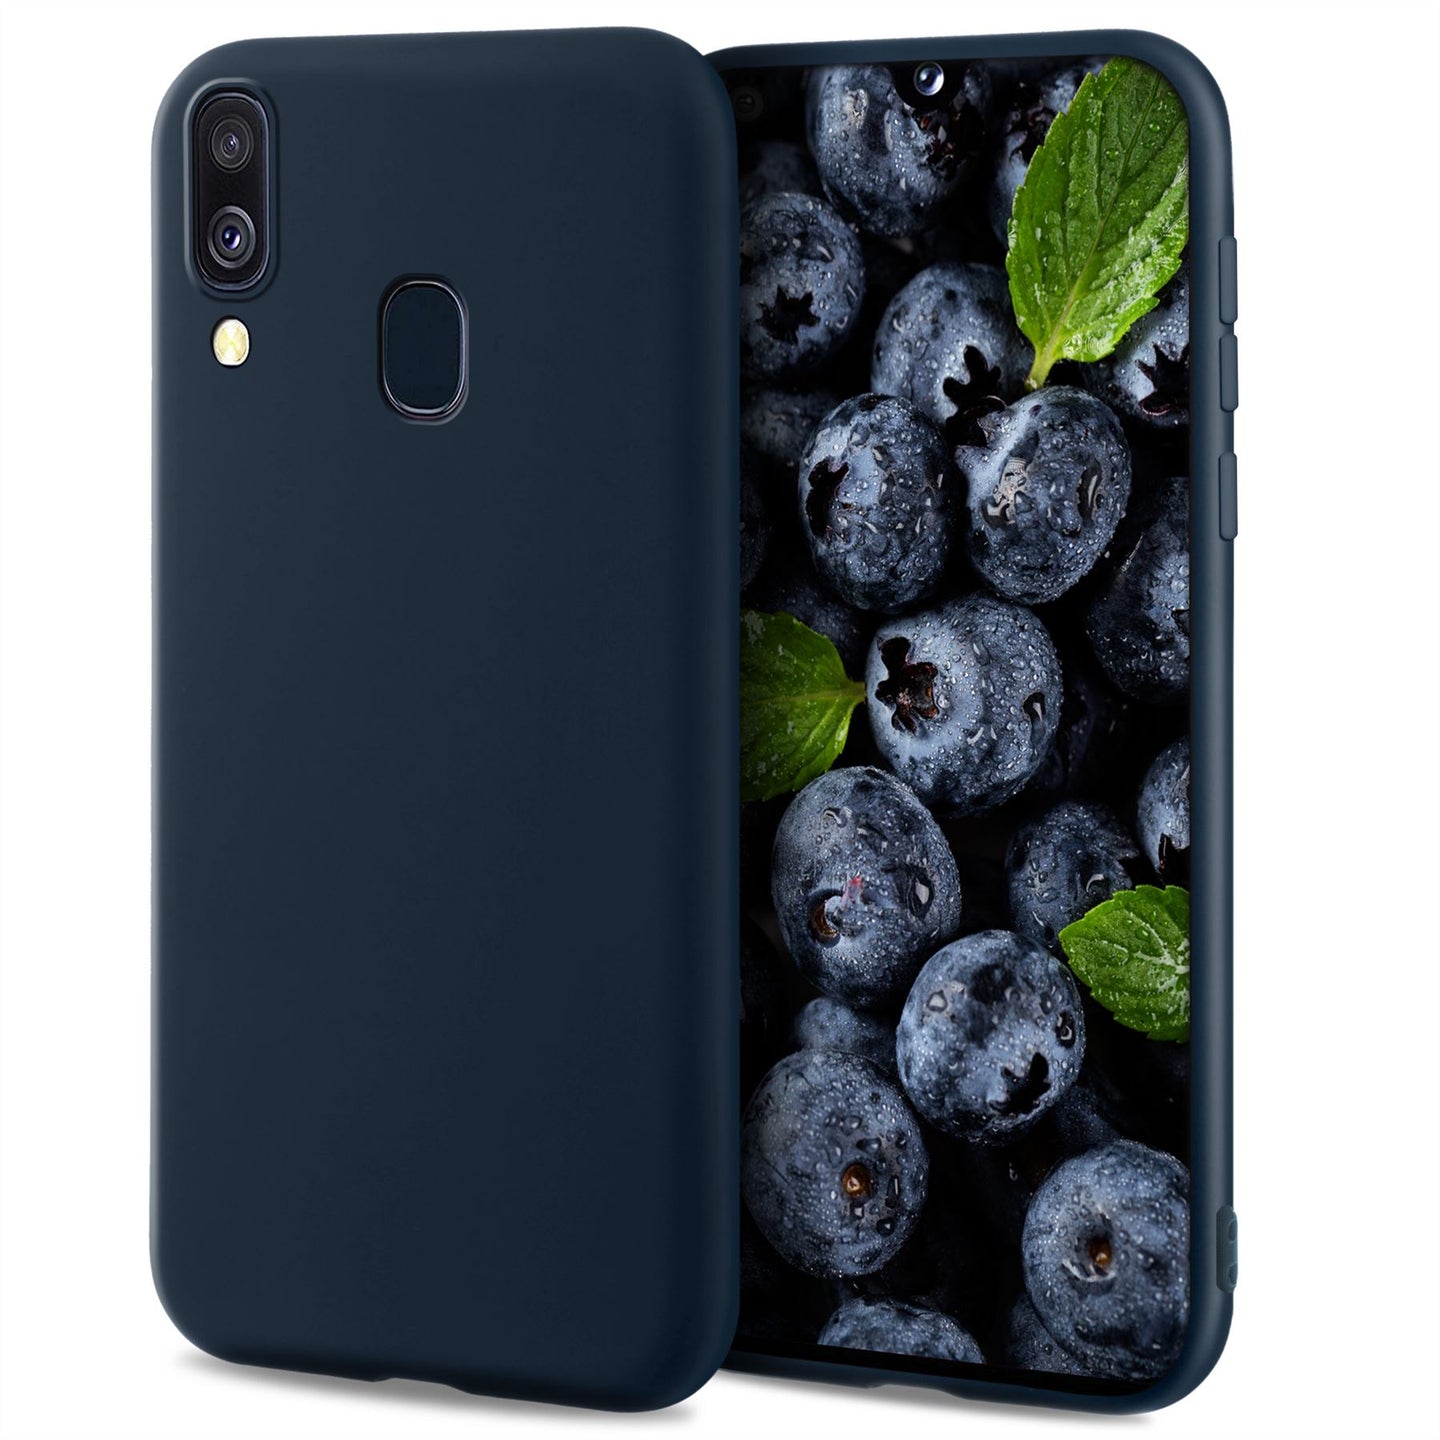 Moozy Lifestyle. Designed for Samsung A20e Case, Midnight Blue - Liquid Silicone Cover with Matte Finish and Soft Microfiber Lining